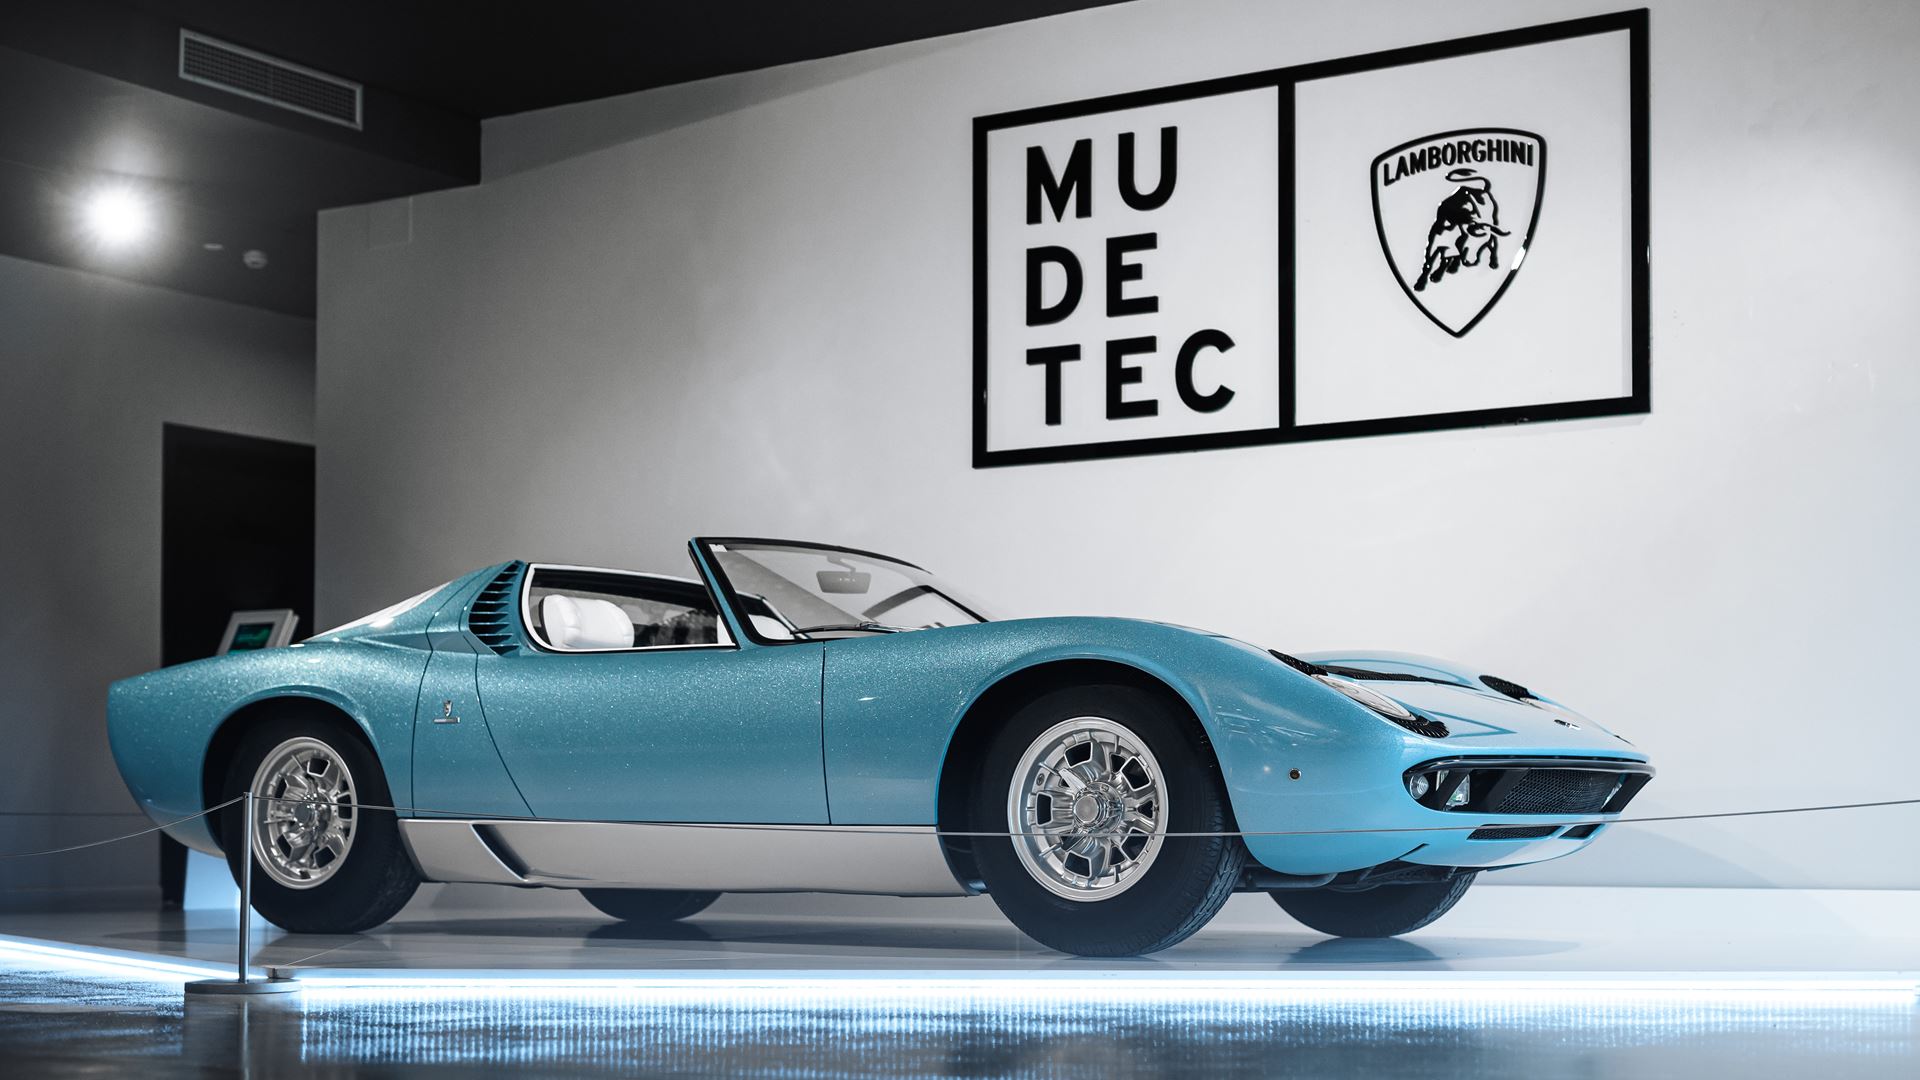 Lamborghini Miura Roadster. The unique 1968 example is on display at the  MUDETEC in Sant'Agata Bolognese until 30 November